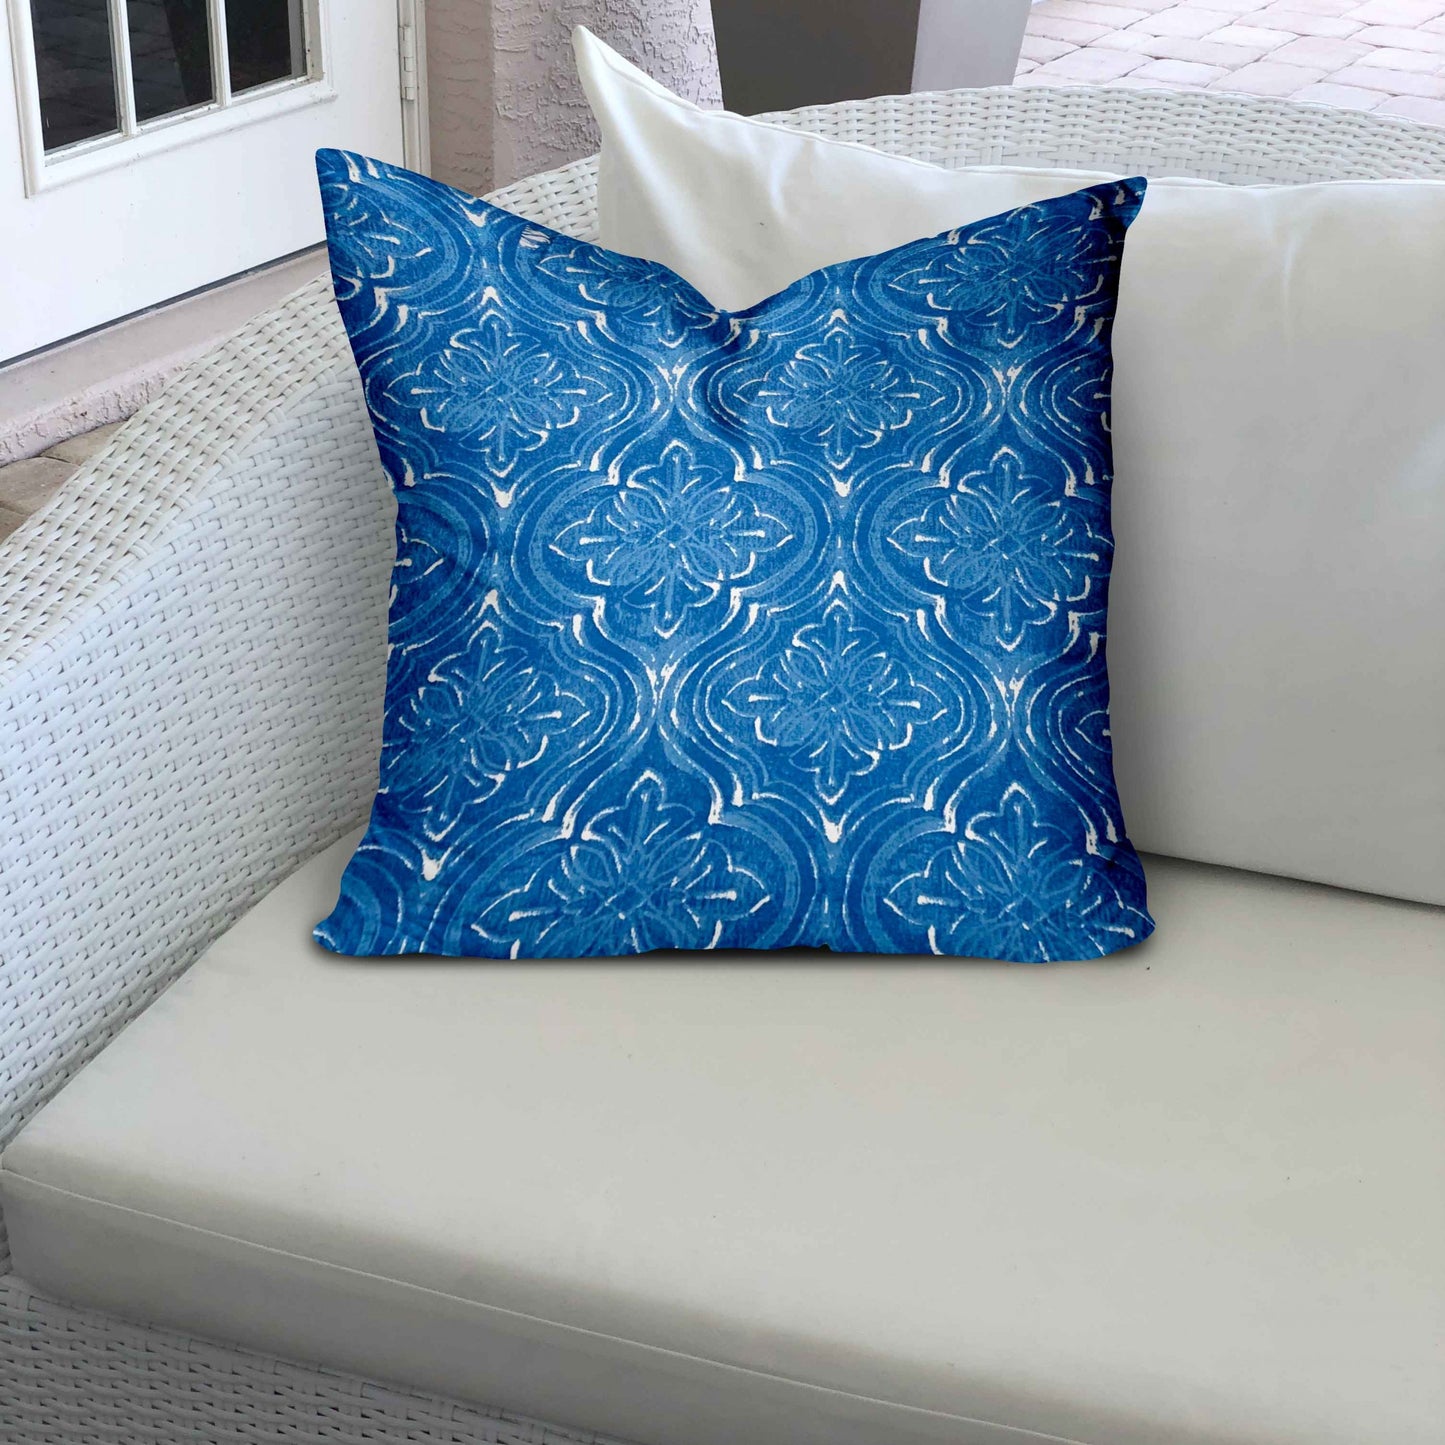 14" X 14" Blue And White Blown Seam Ikat Throw Indoor Outdoor Pillow